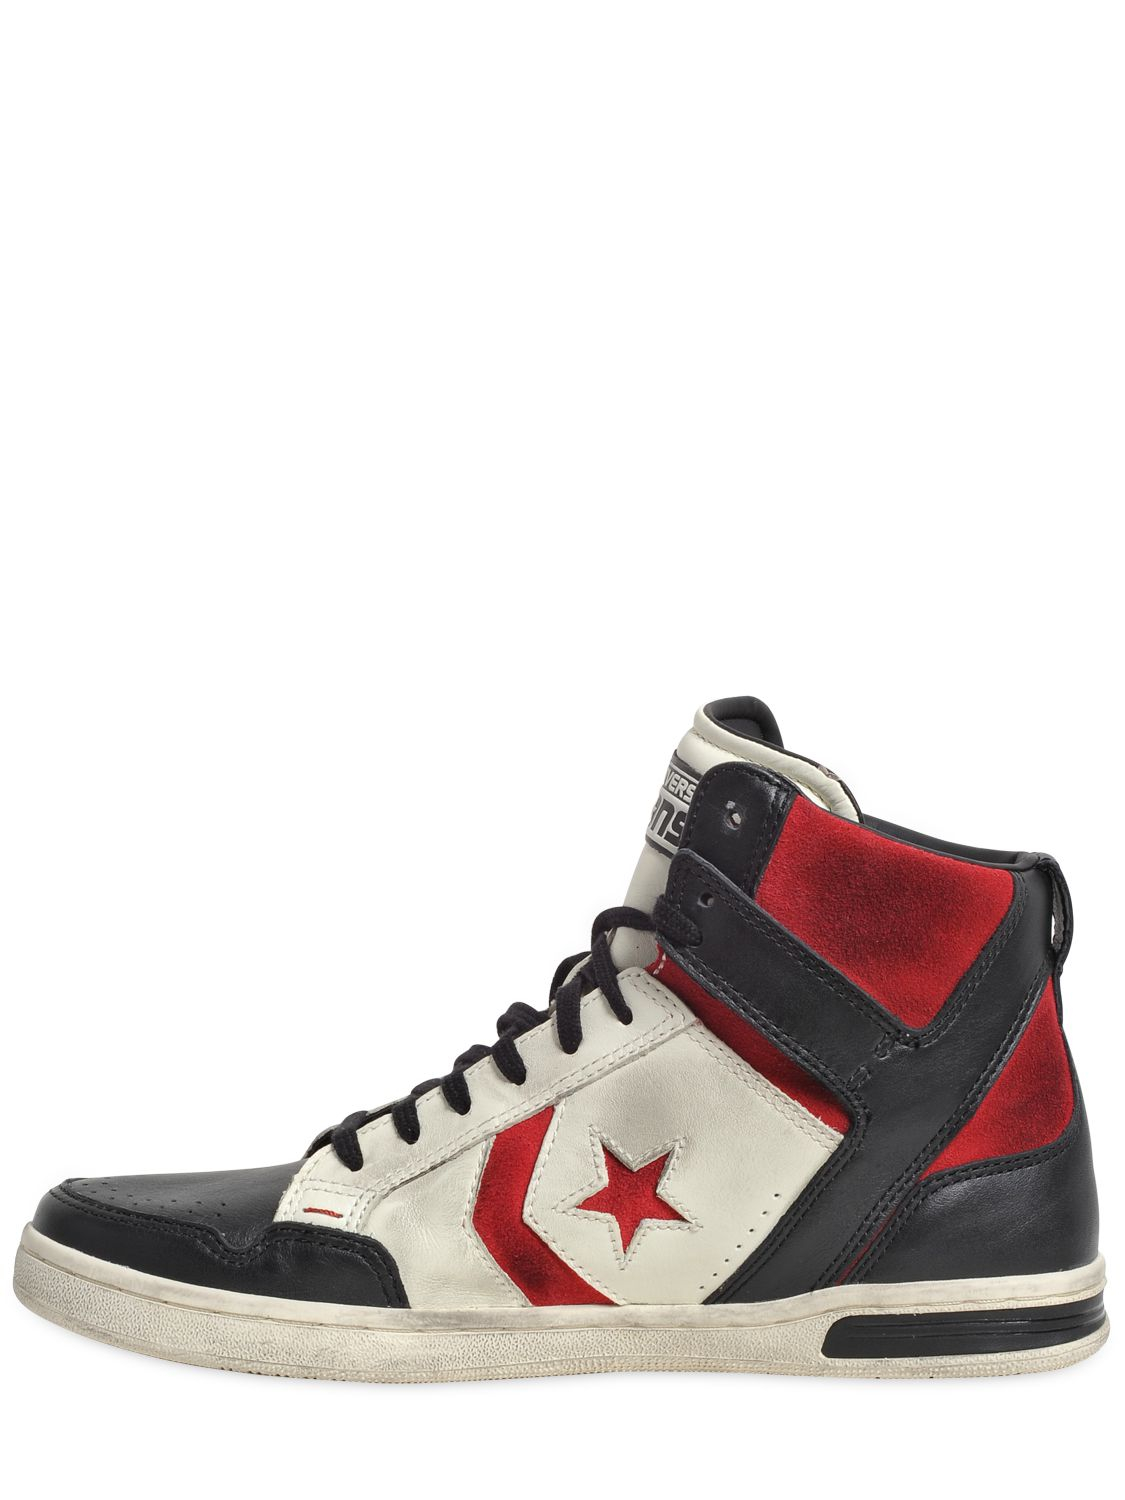 Converse Weapon Leather High Top Sneakers in White for Men - Lyst